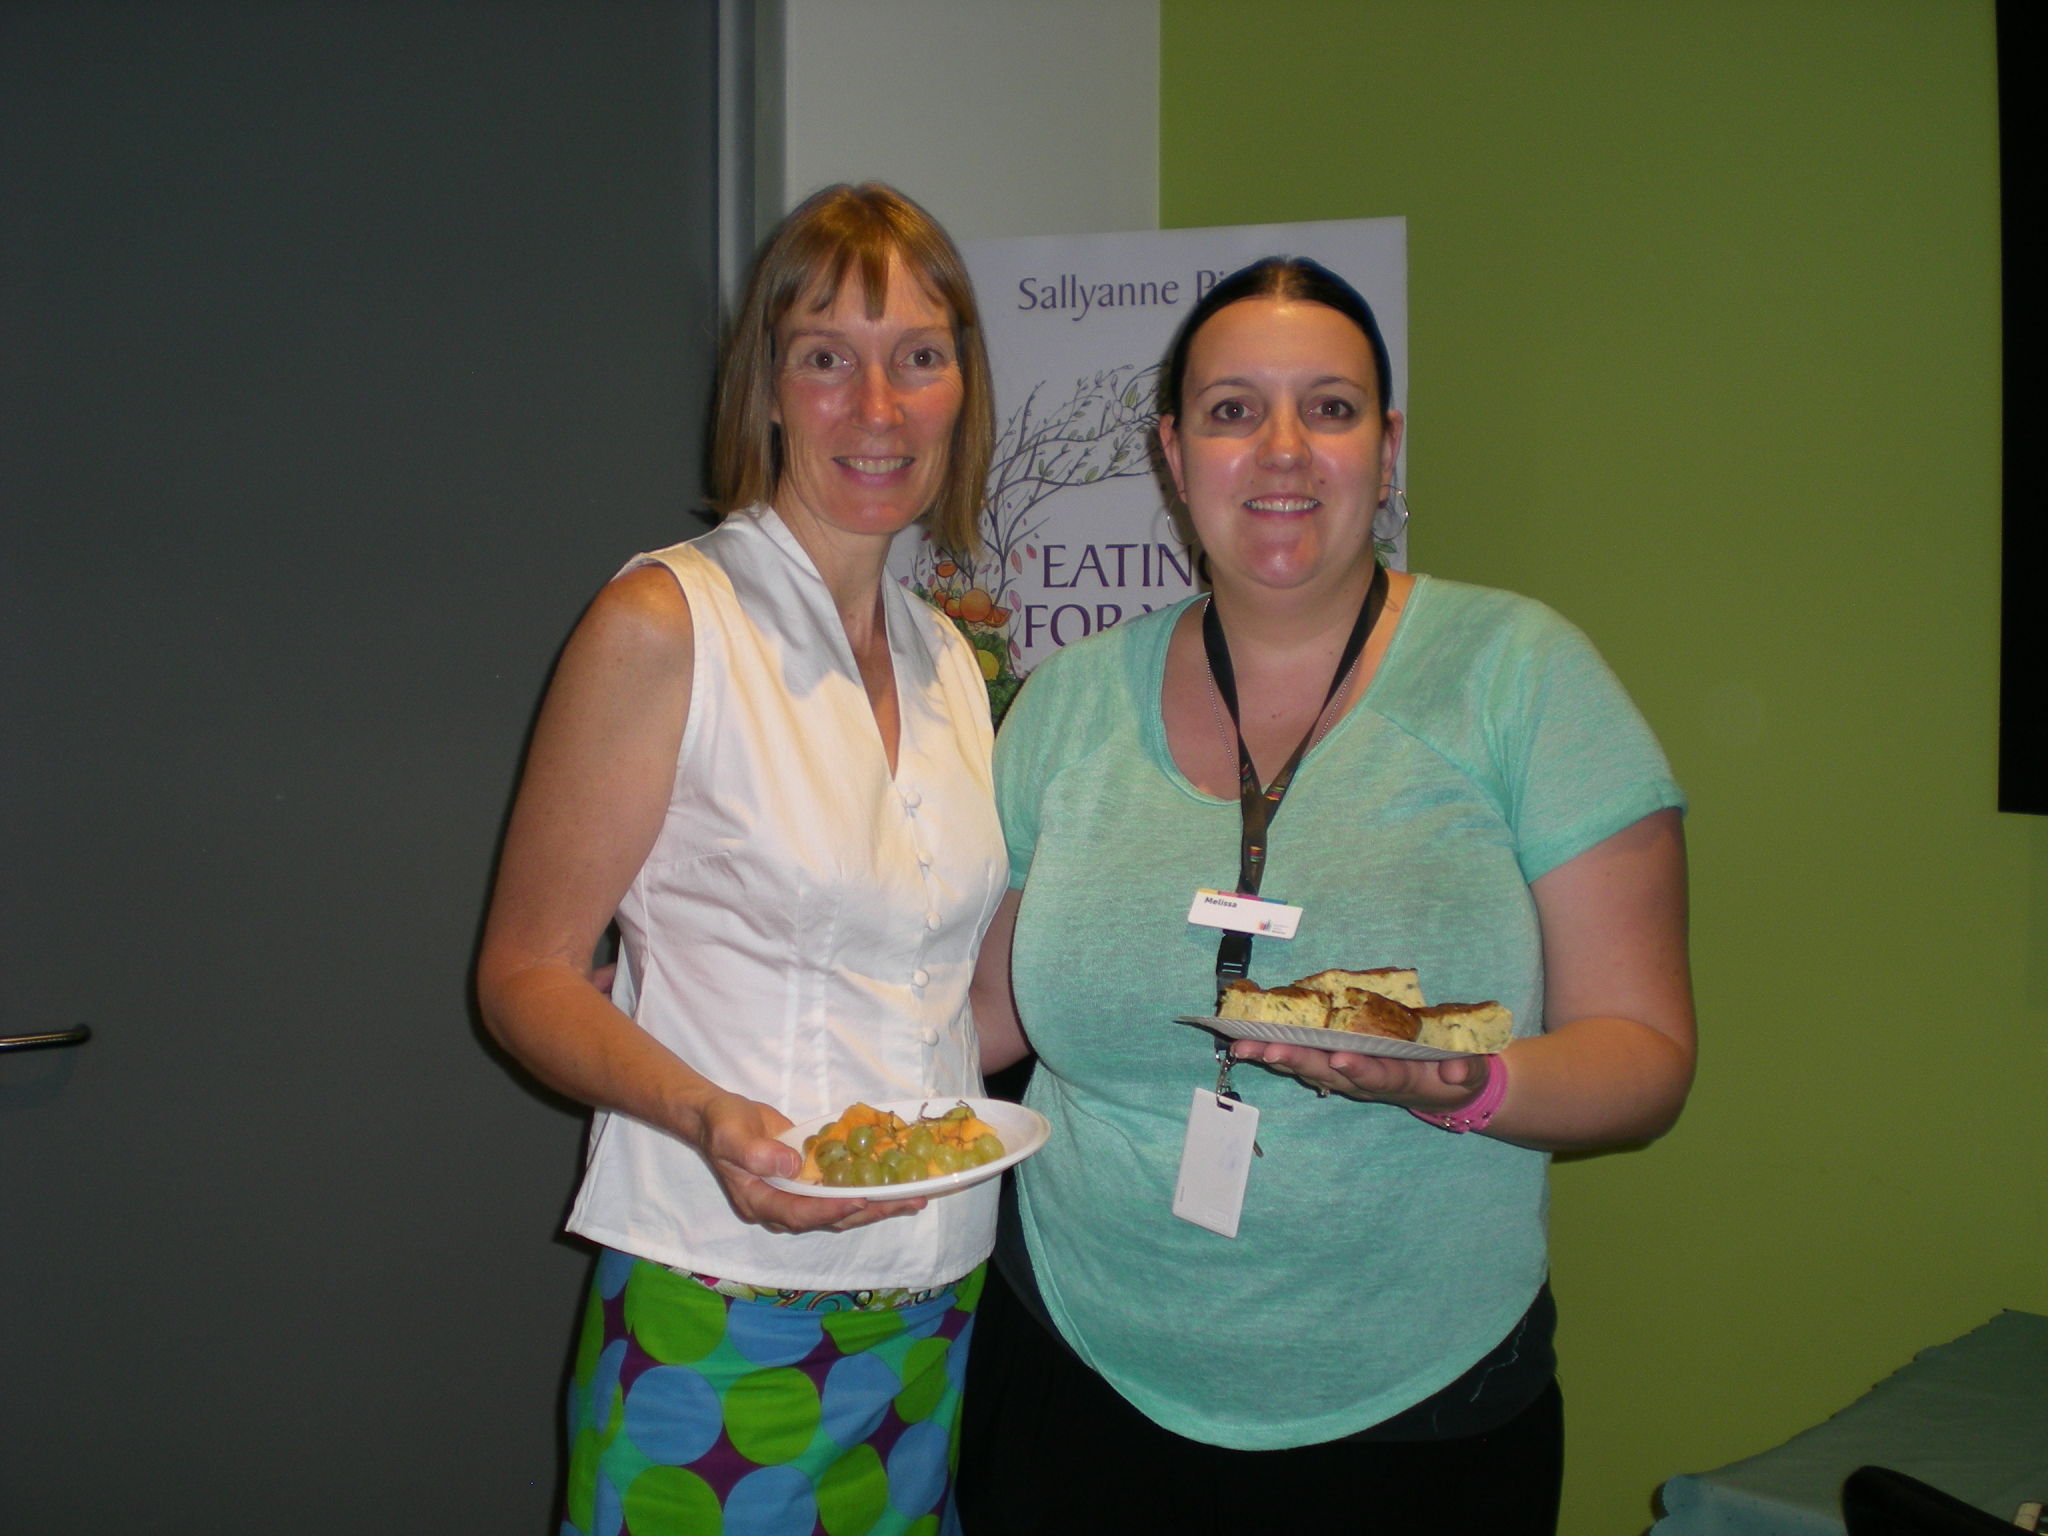 Samples of the great morning tea at Shepparton Library